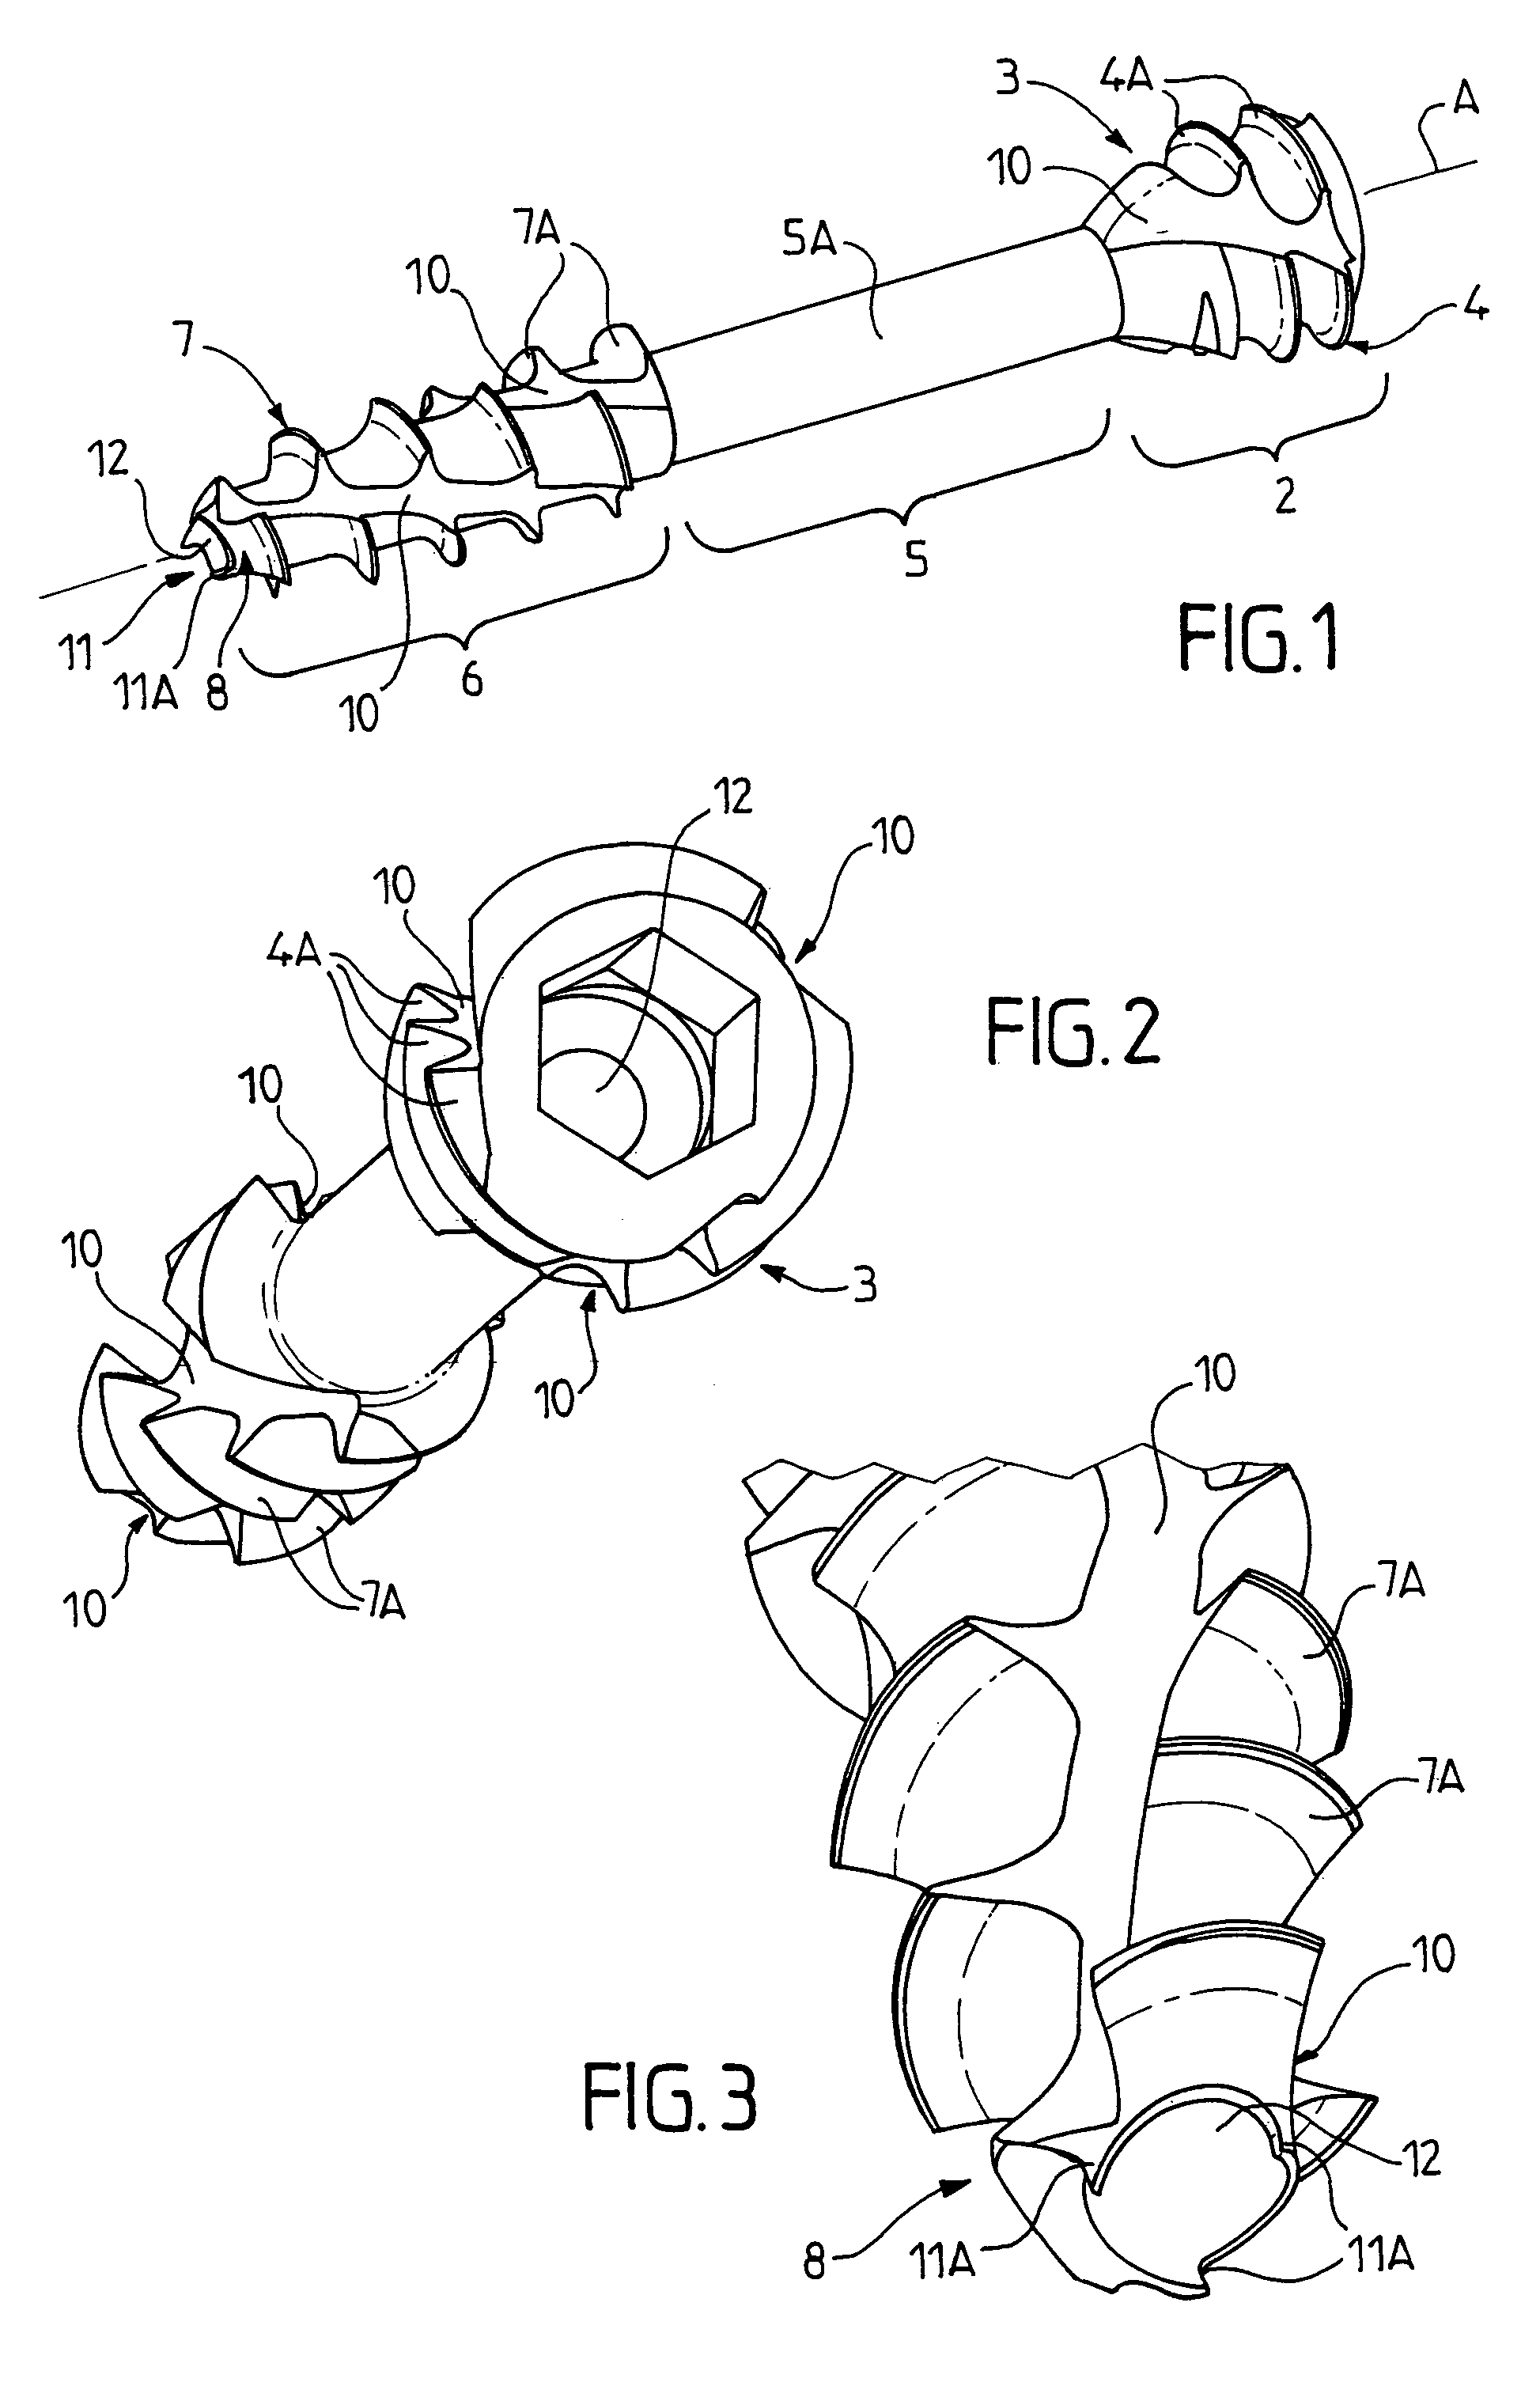 Self-boring and self-tapping screw for osteosynthesis and compression